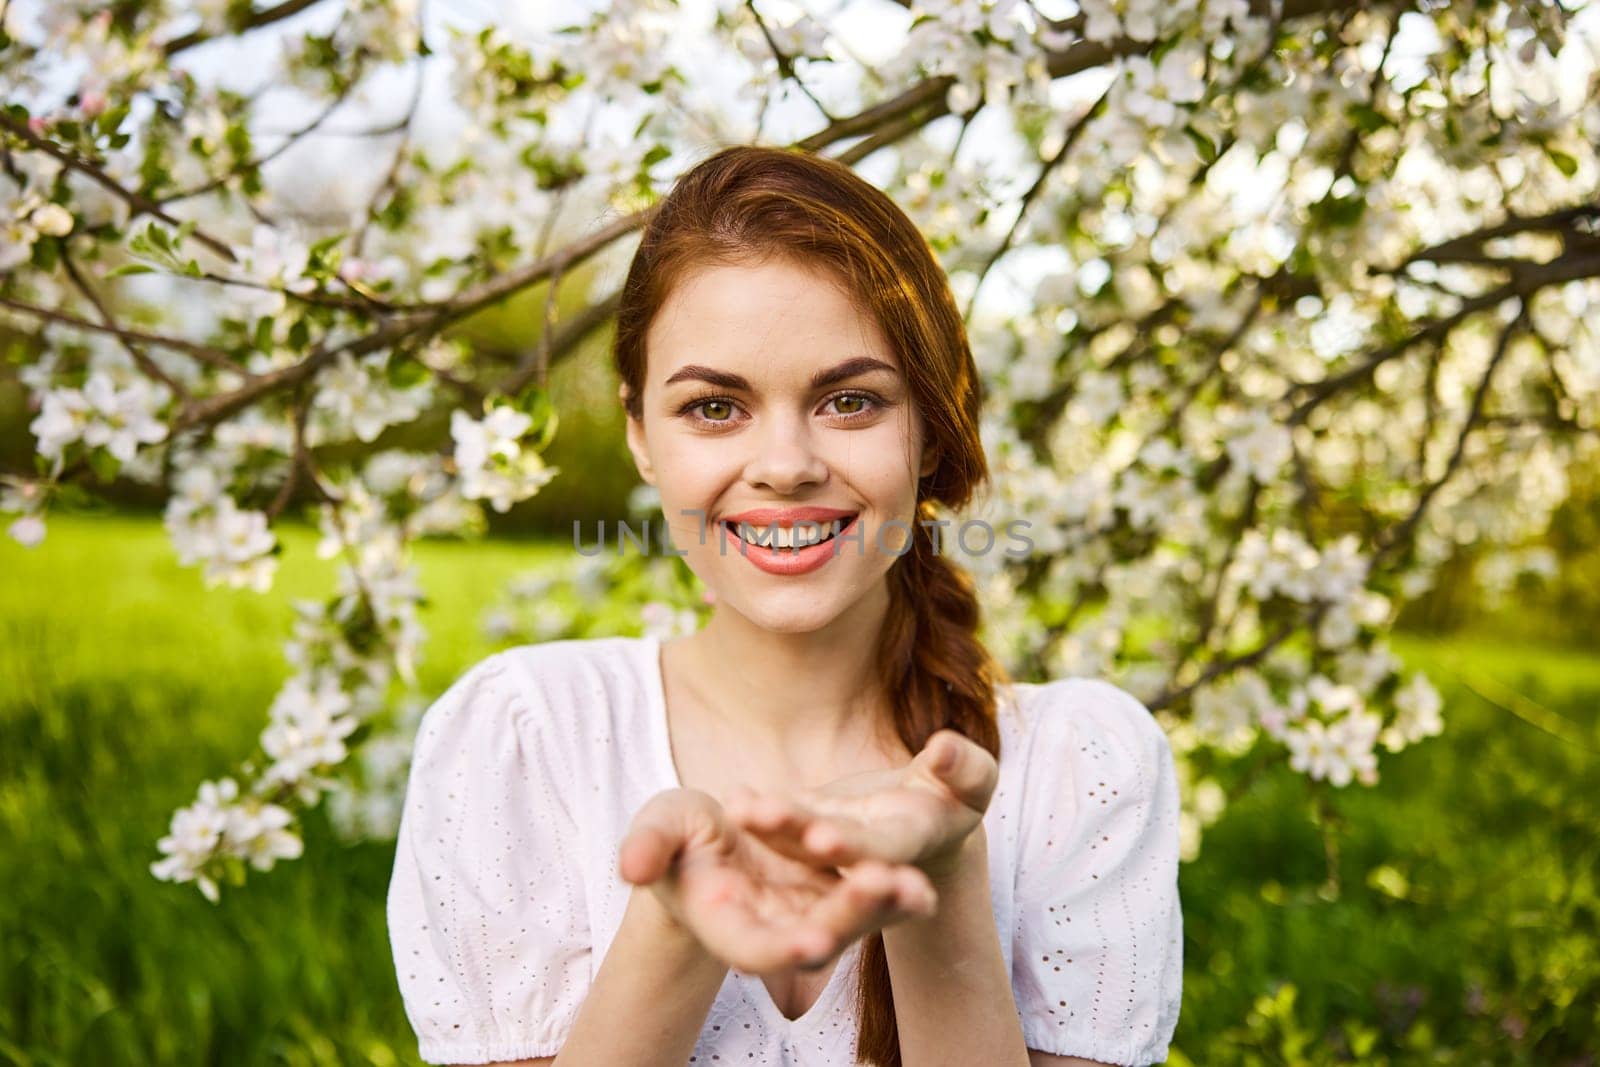 openly smiling woman against the backdrop of a flowering tree stretches her palms to the camera by Vichizh